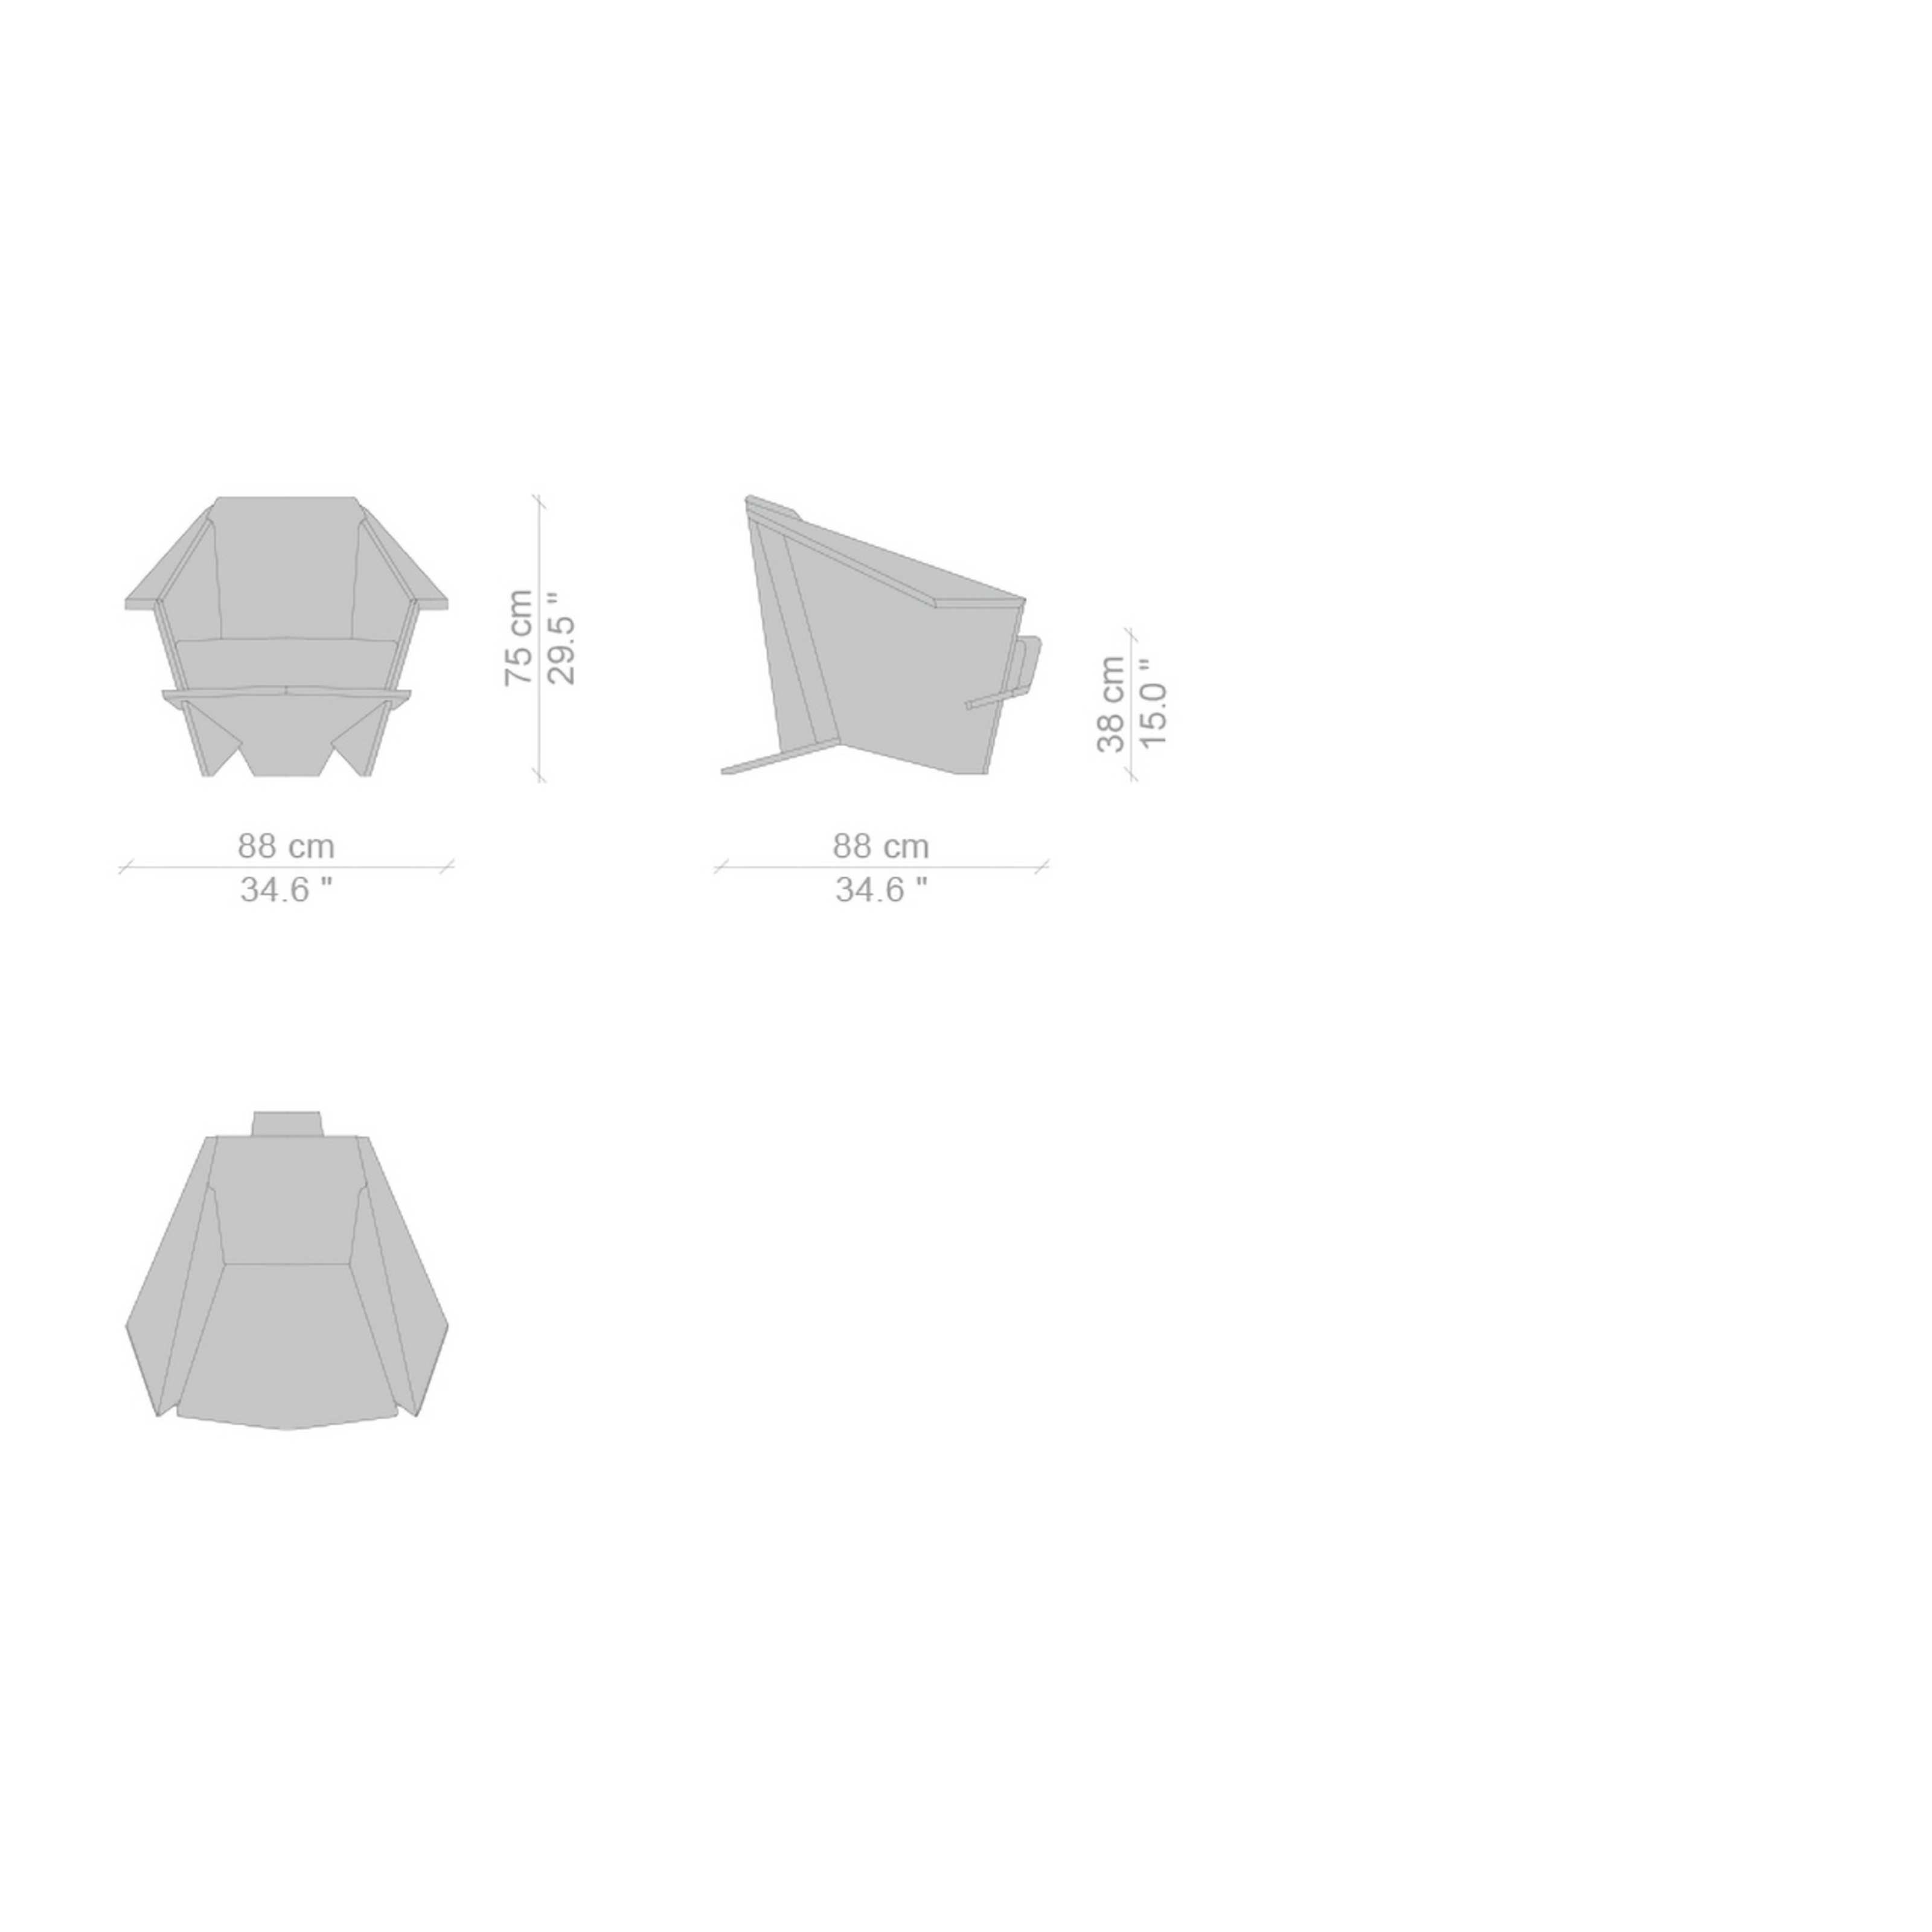 Drawing showing the chair dimensions